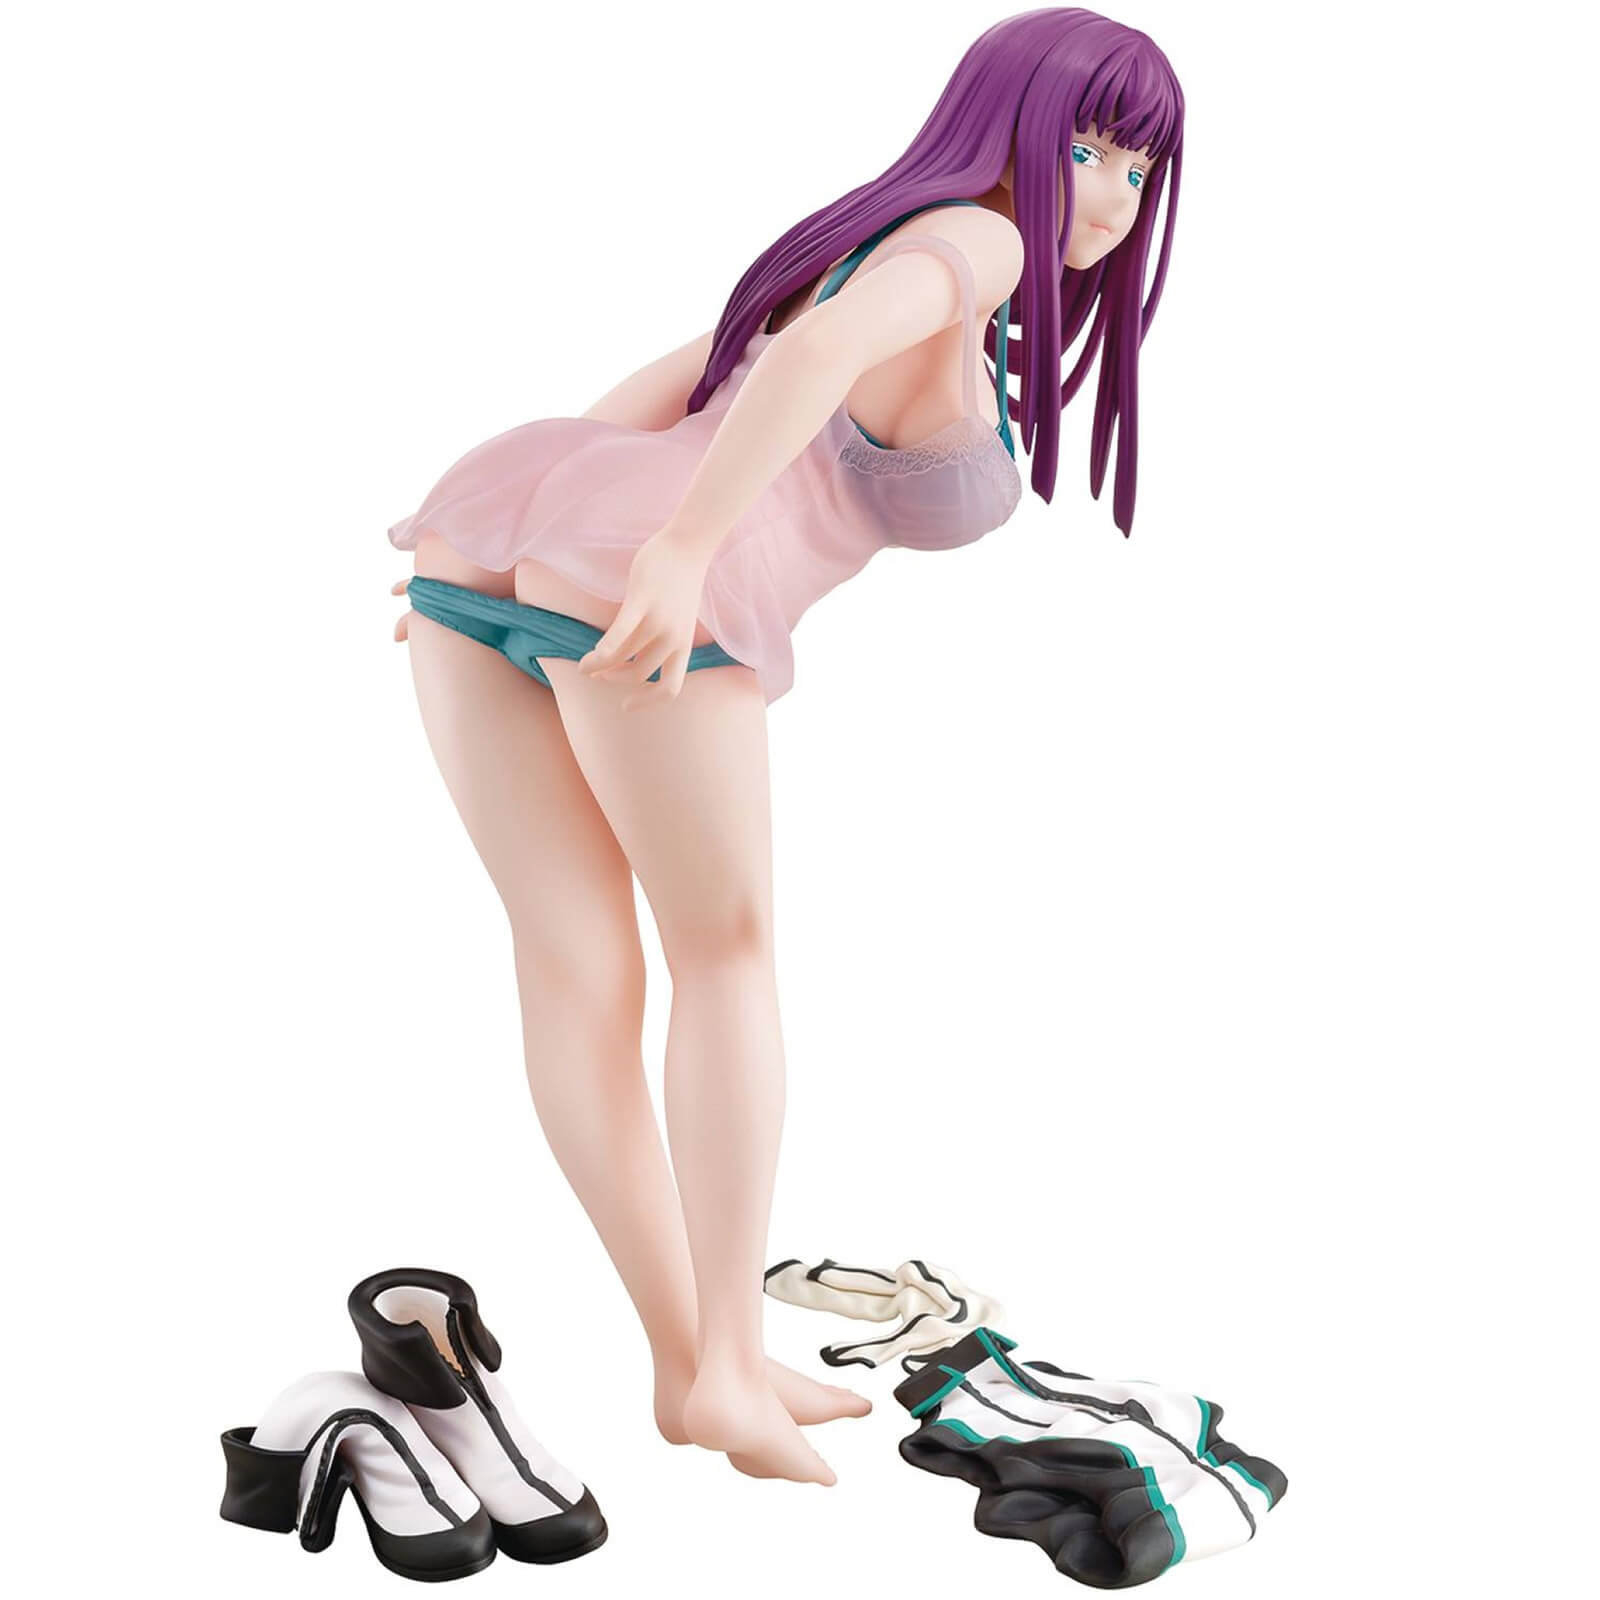 World's End Harem 1/6 PVC Figure - Ira Suou In Negligee